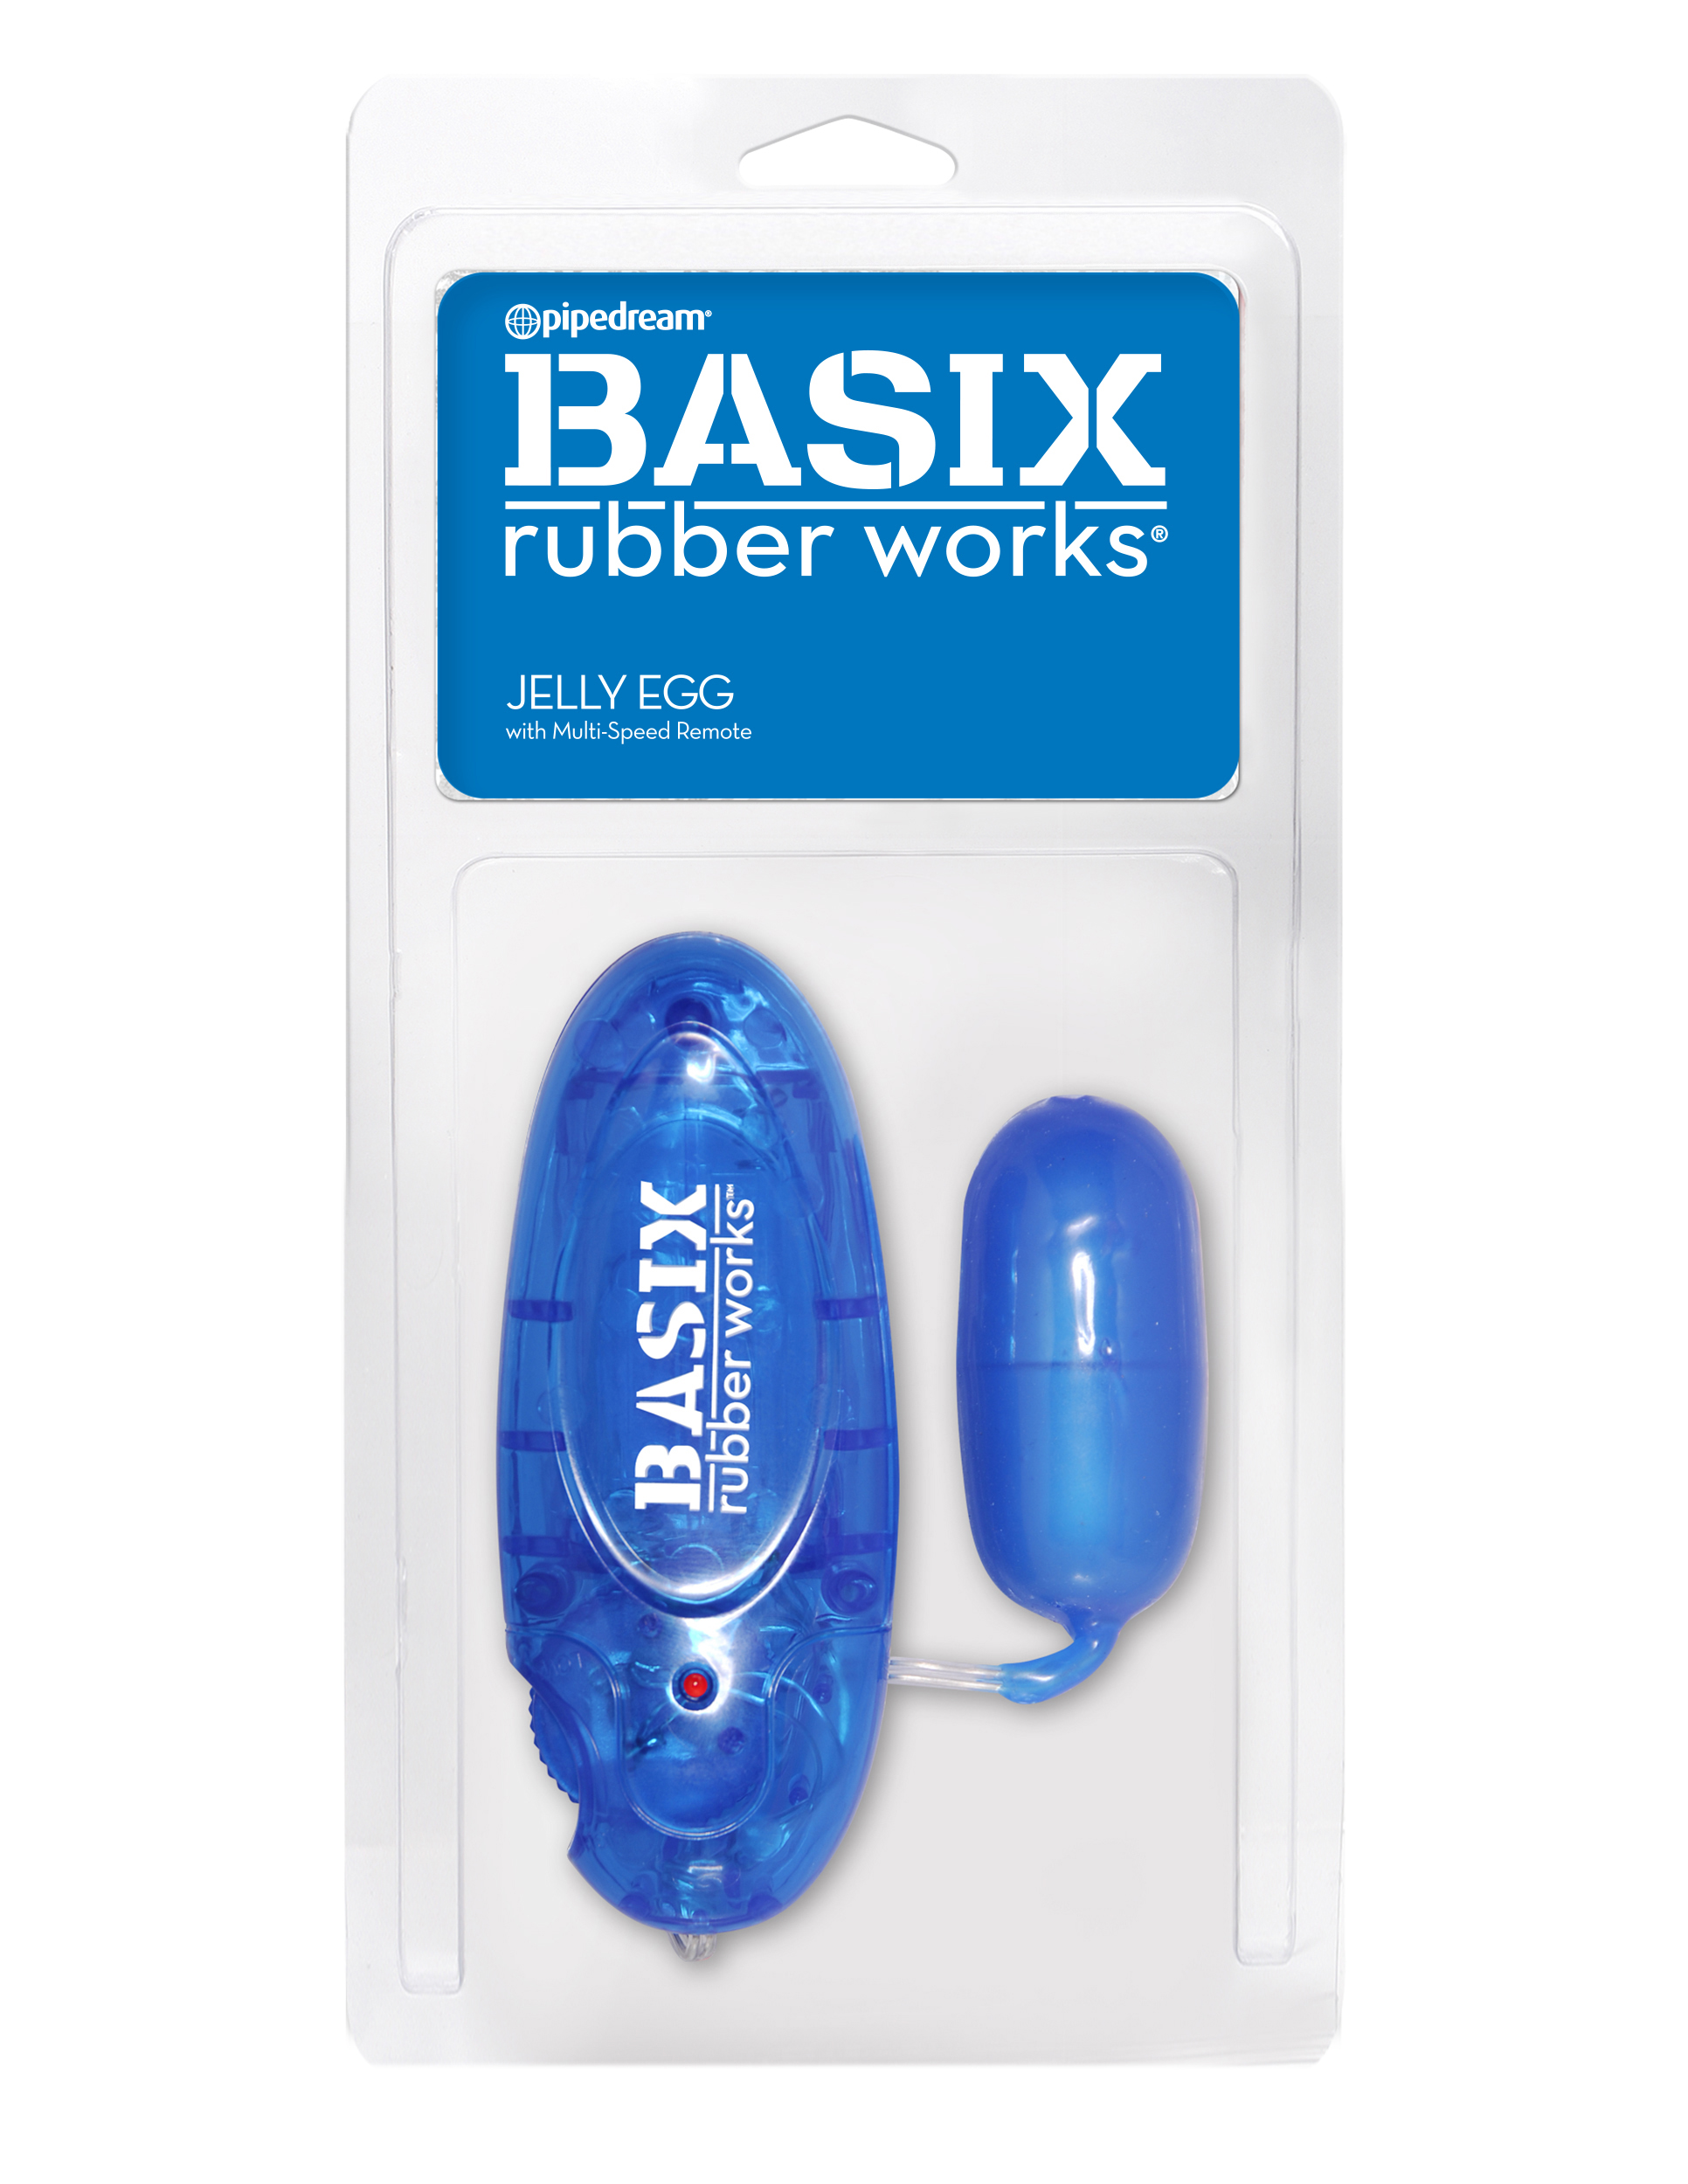 Basix Rubber Works Jelly Egg - Blue